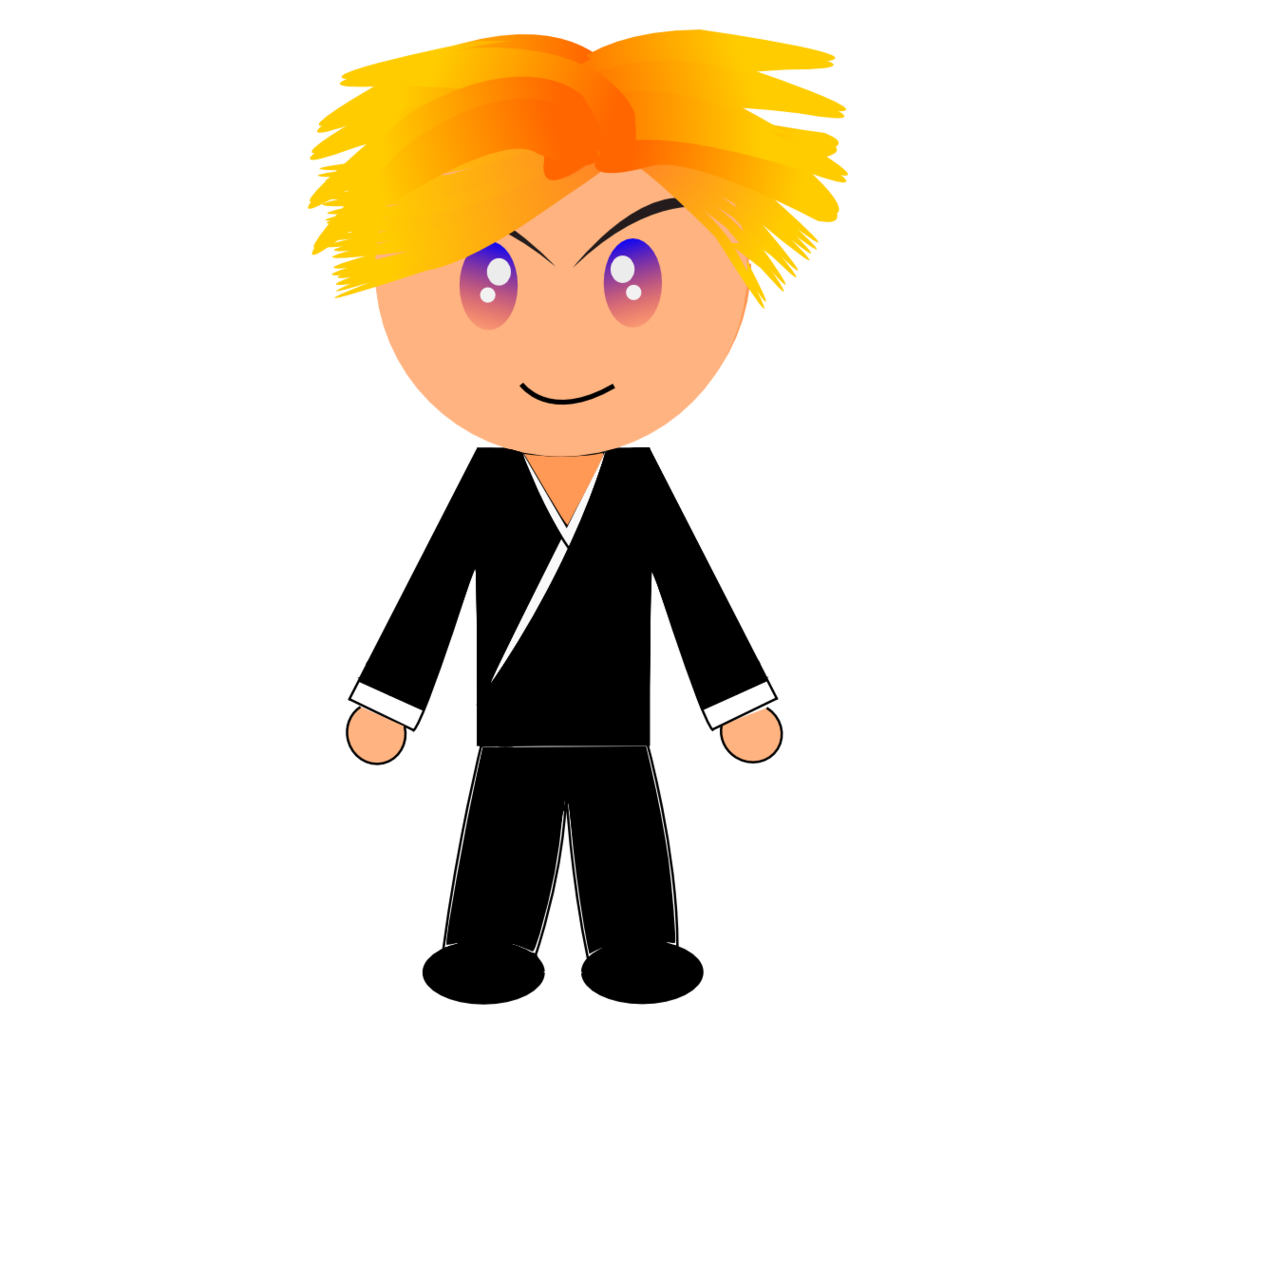 japanese clipart student